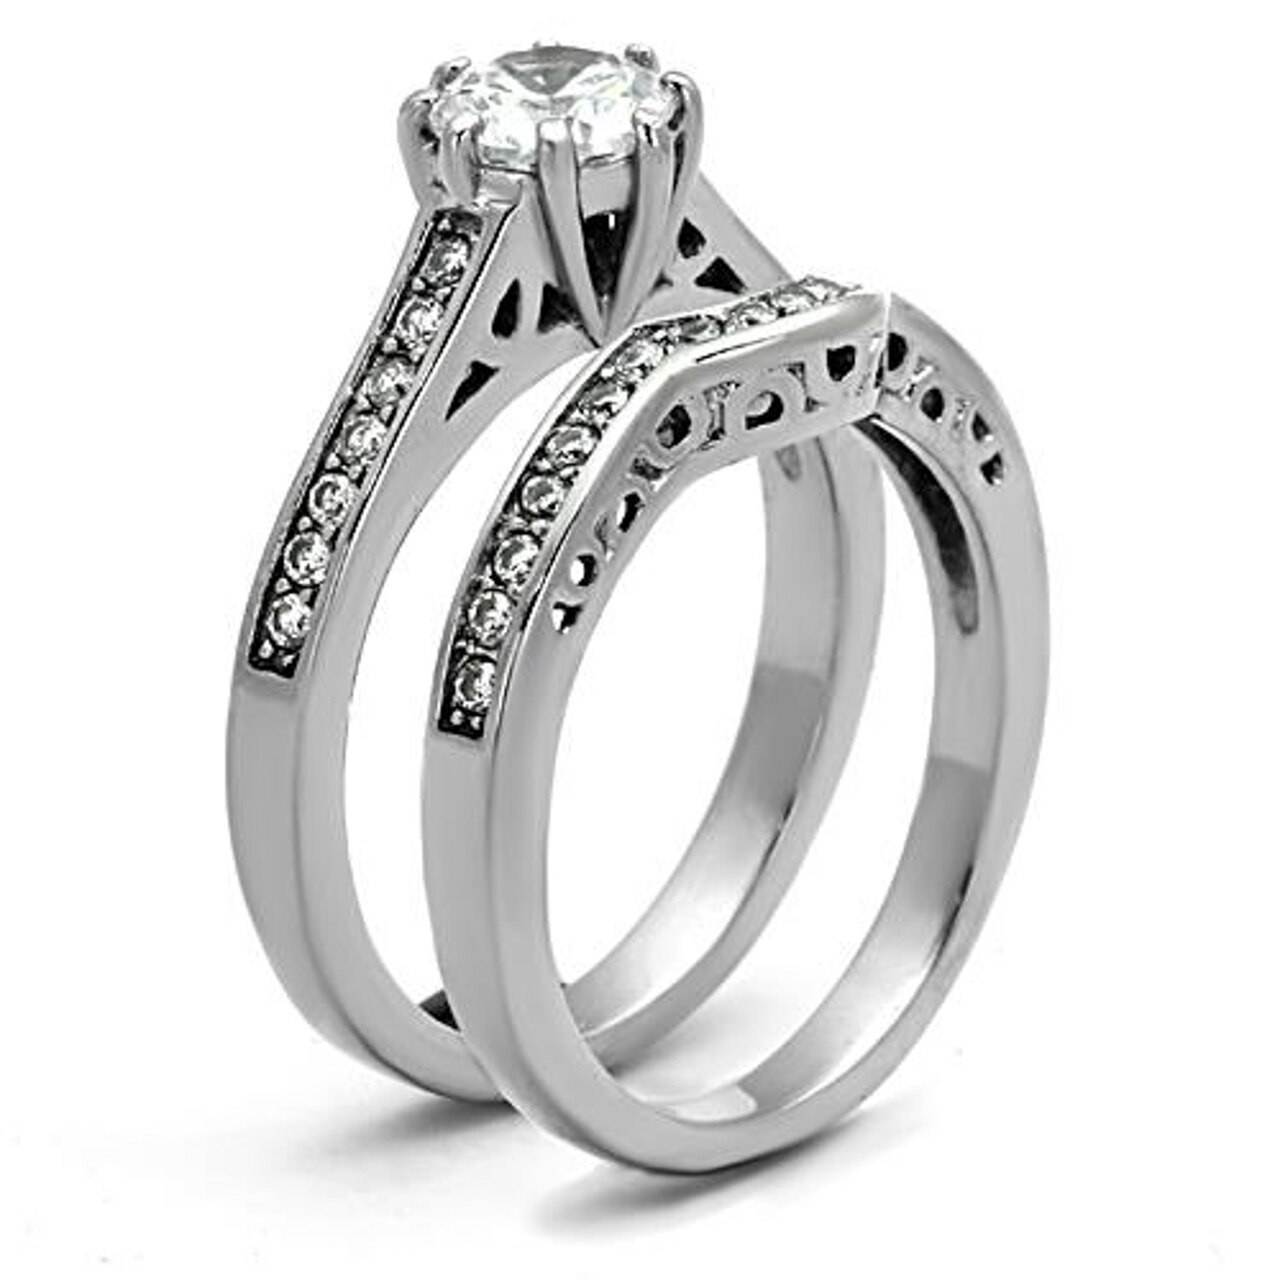 Stainless Steel Cubic Zirconia Wedding Ring Sets
 ARTK1330 Stainless Steel 316l 1 85 Ct Cubic Zirconia